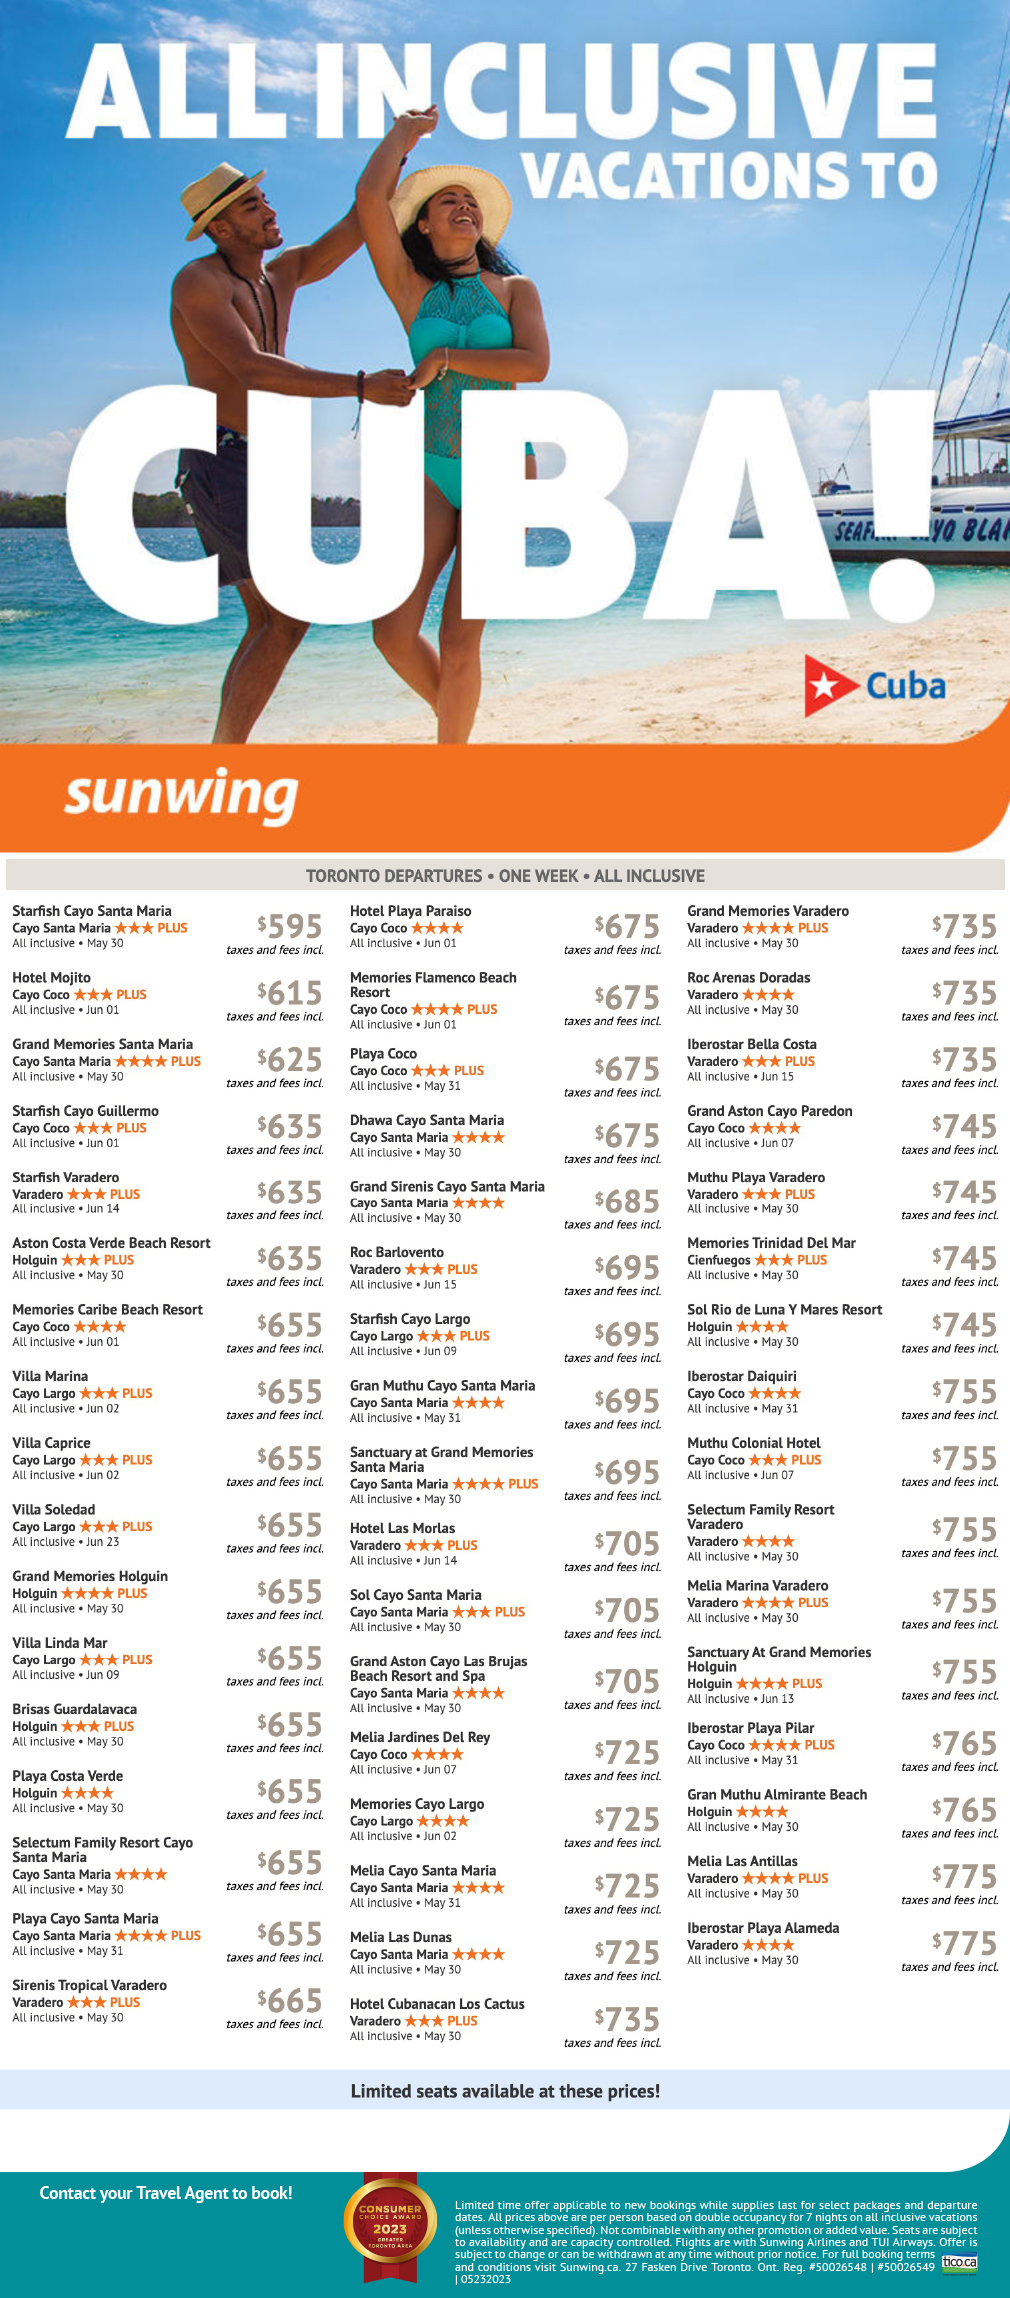 All Inclusive Vacations To Cuba